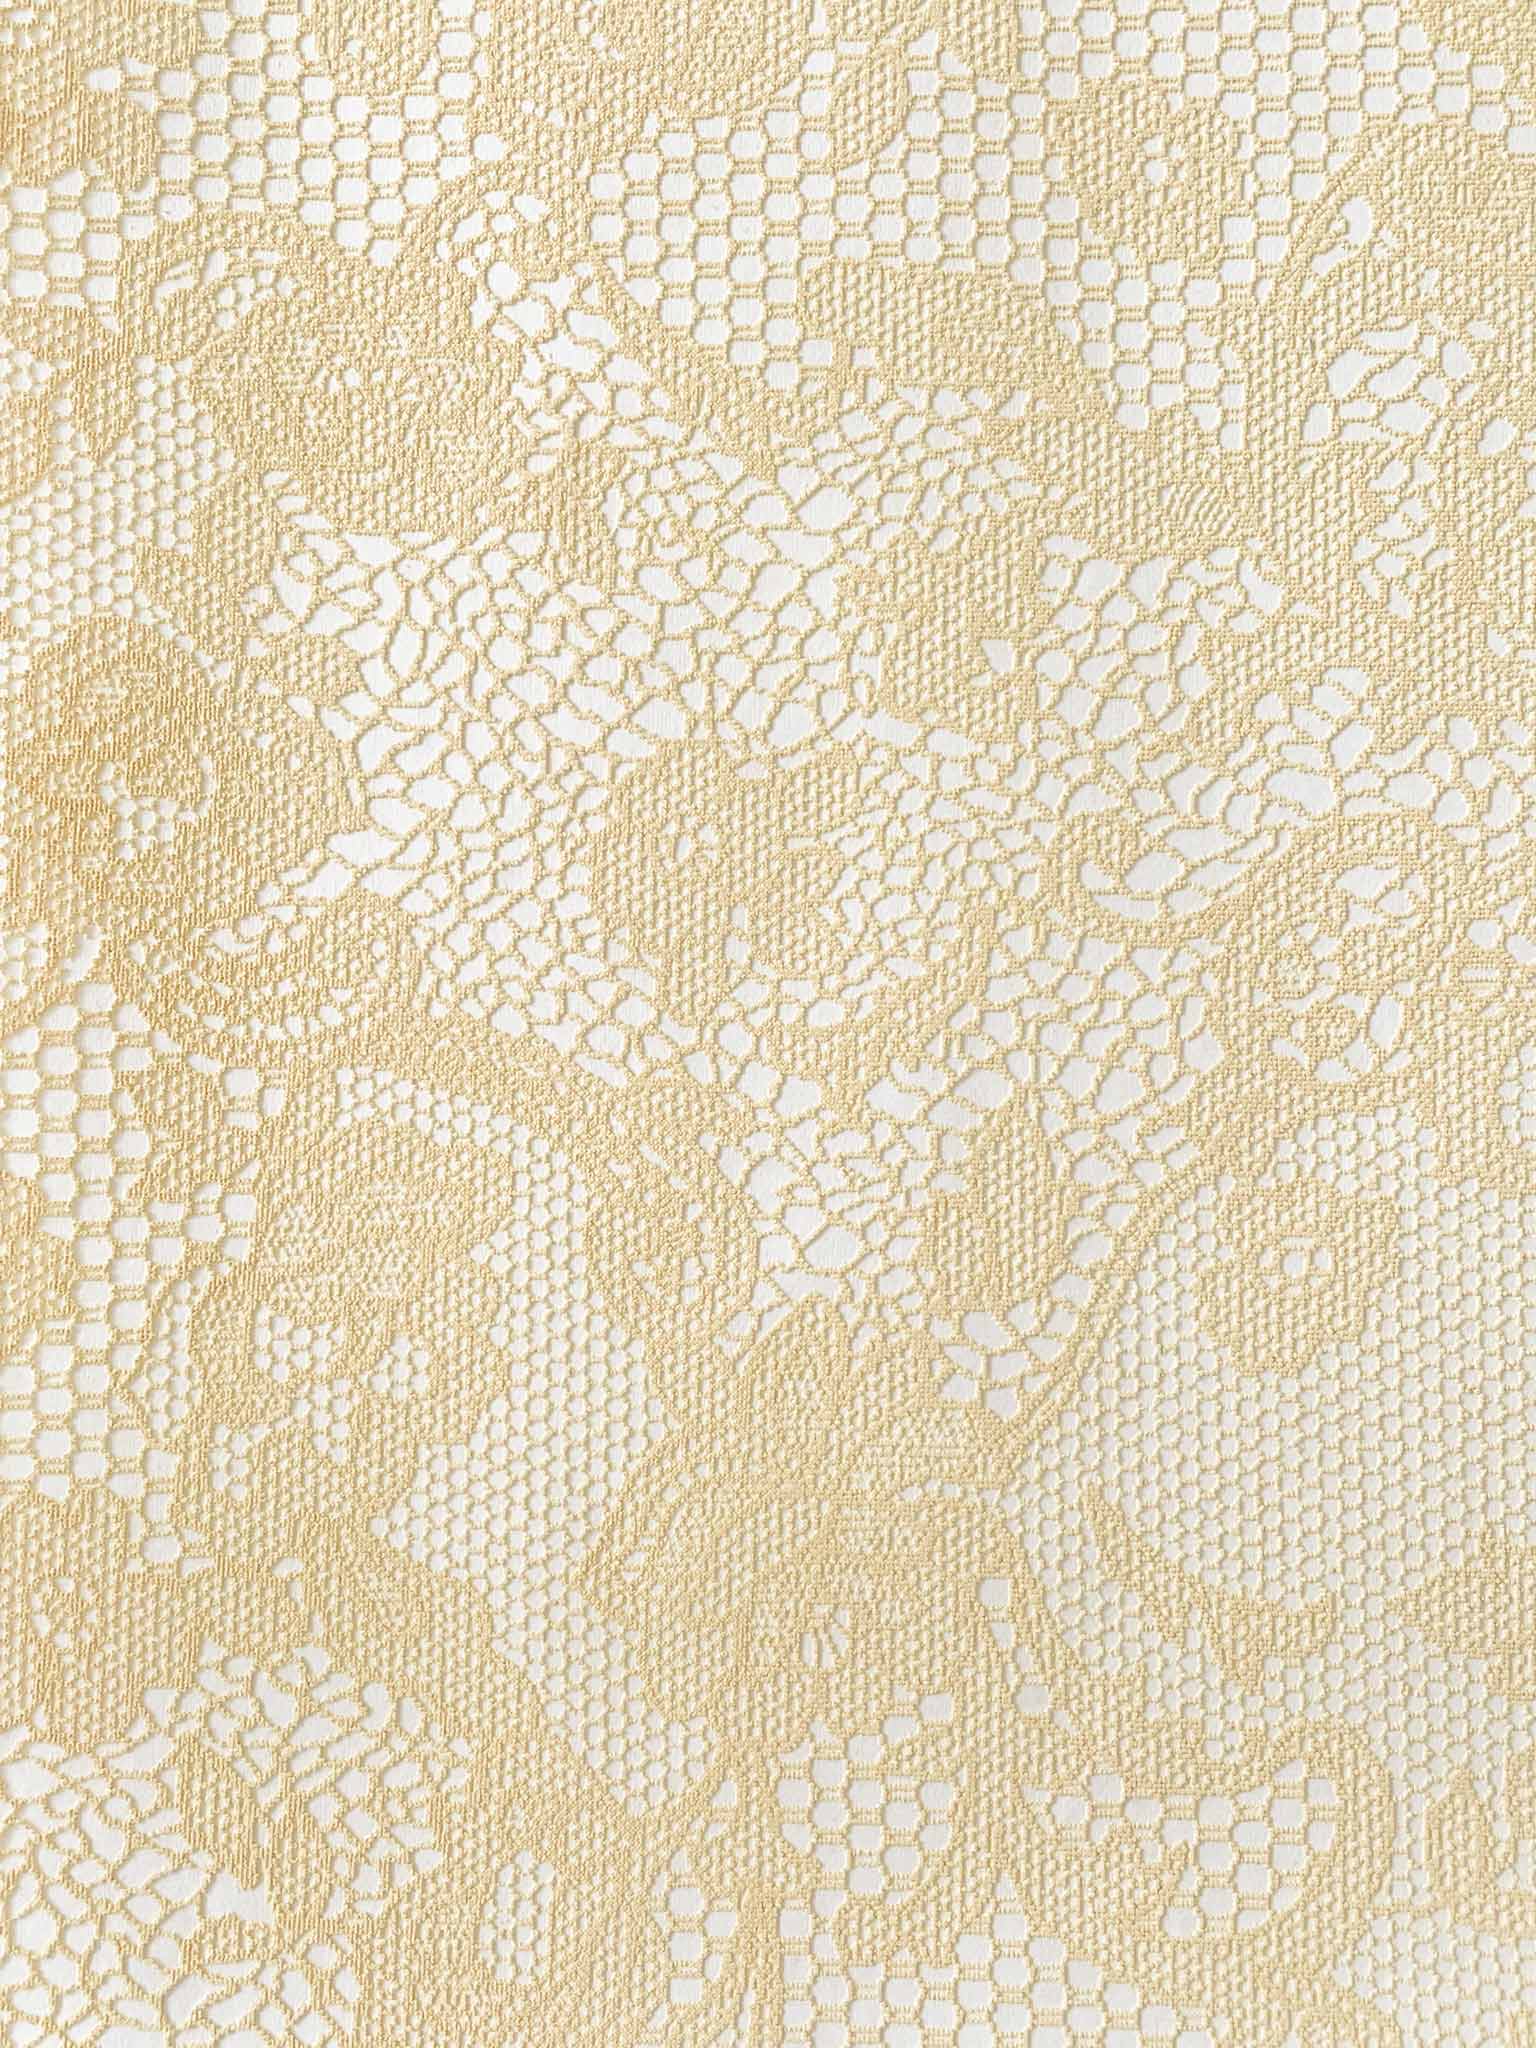 Chantilly Embossed Paper in Cream on White  ImagineDIY   